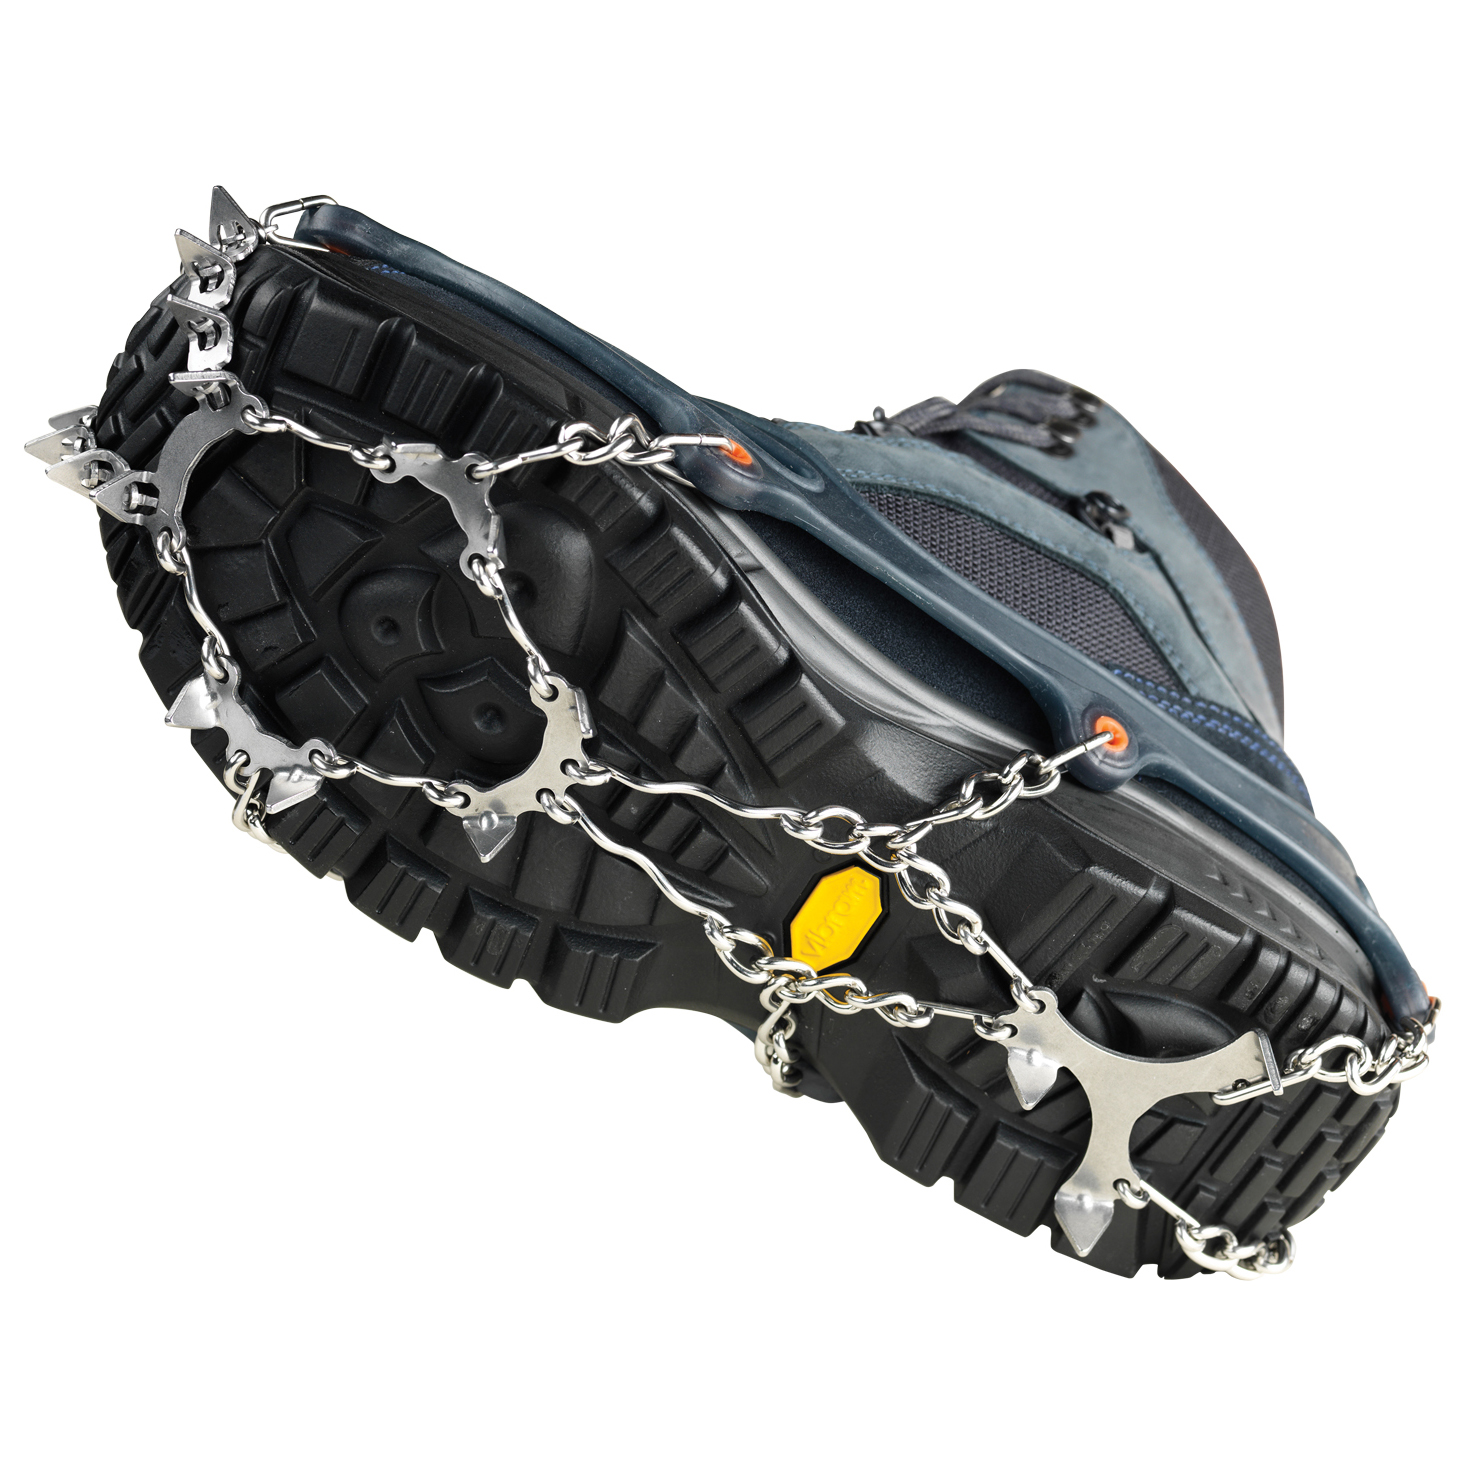 Snowline Chainsen Pro Rock Fishing/Ice Spikes Cleats